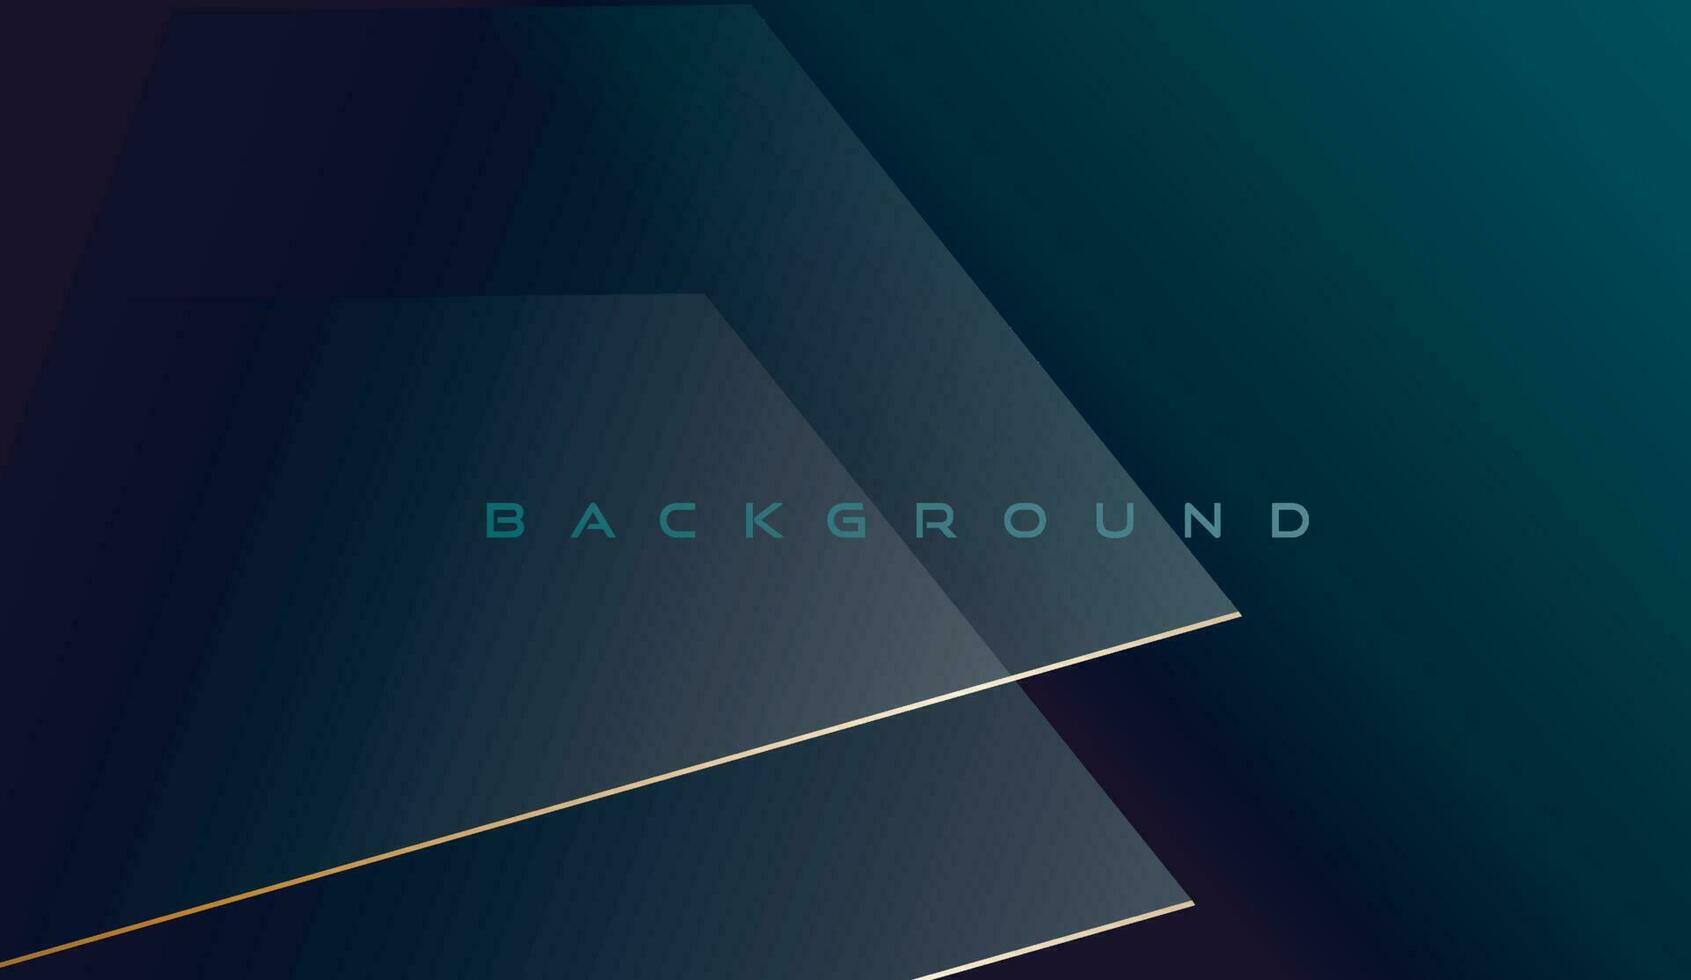 Premium abstract background black, blue, and green design with diagonal white line pattern. Vector horizontal template for digital business banner design with a circle shape and shadow effect